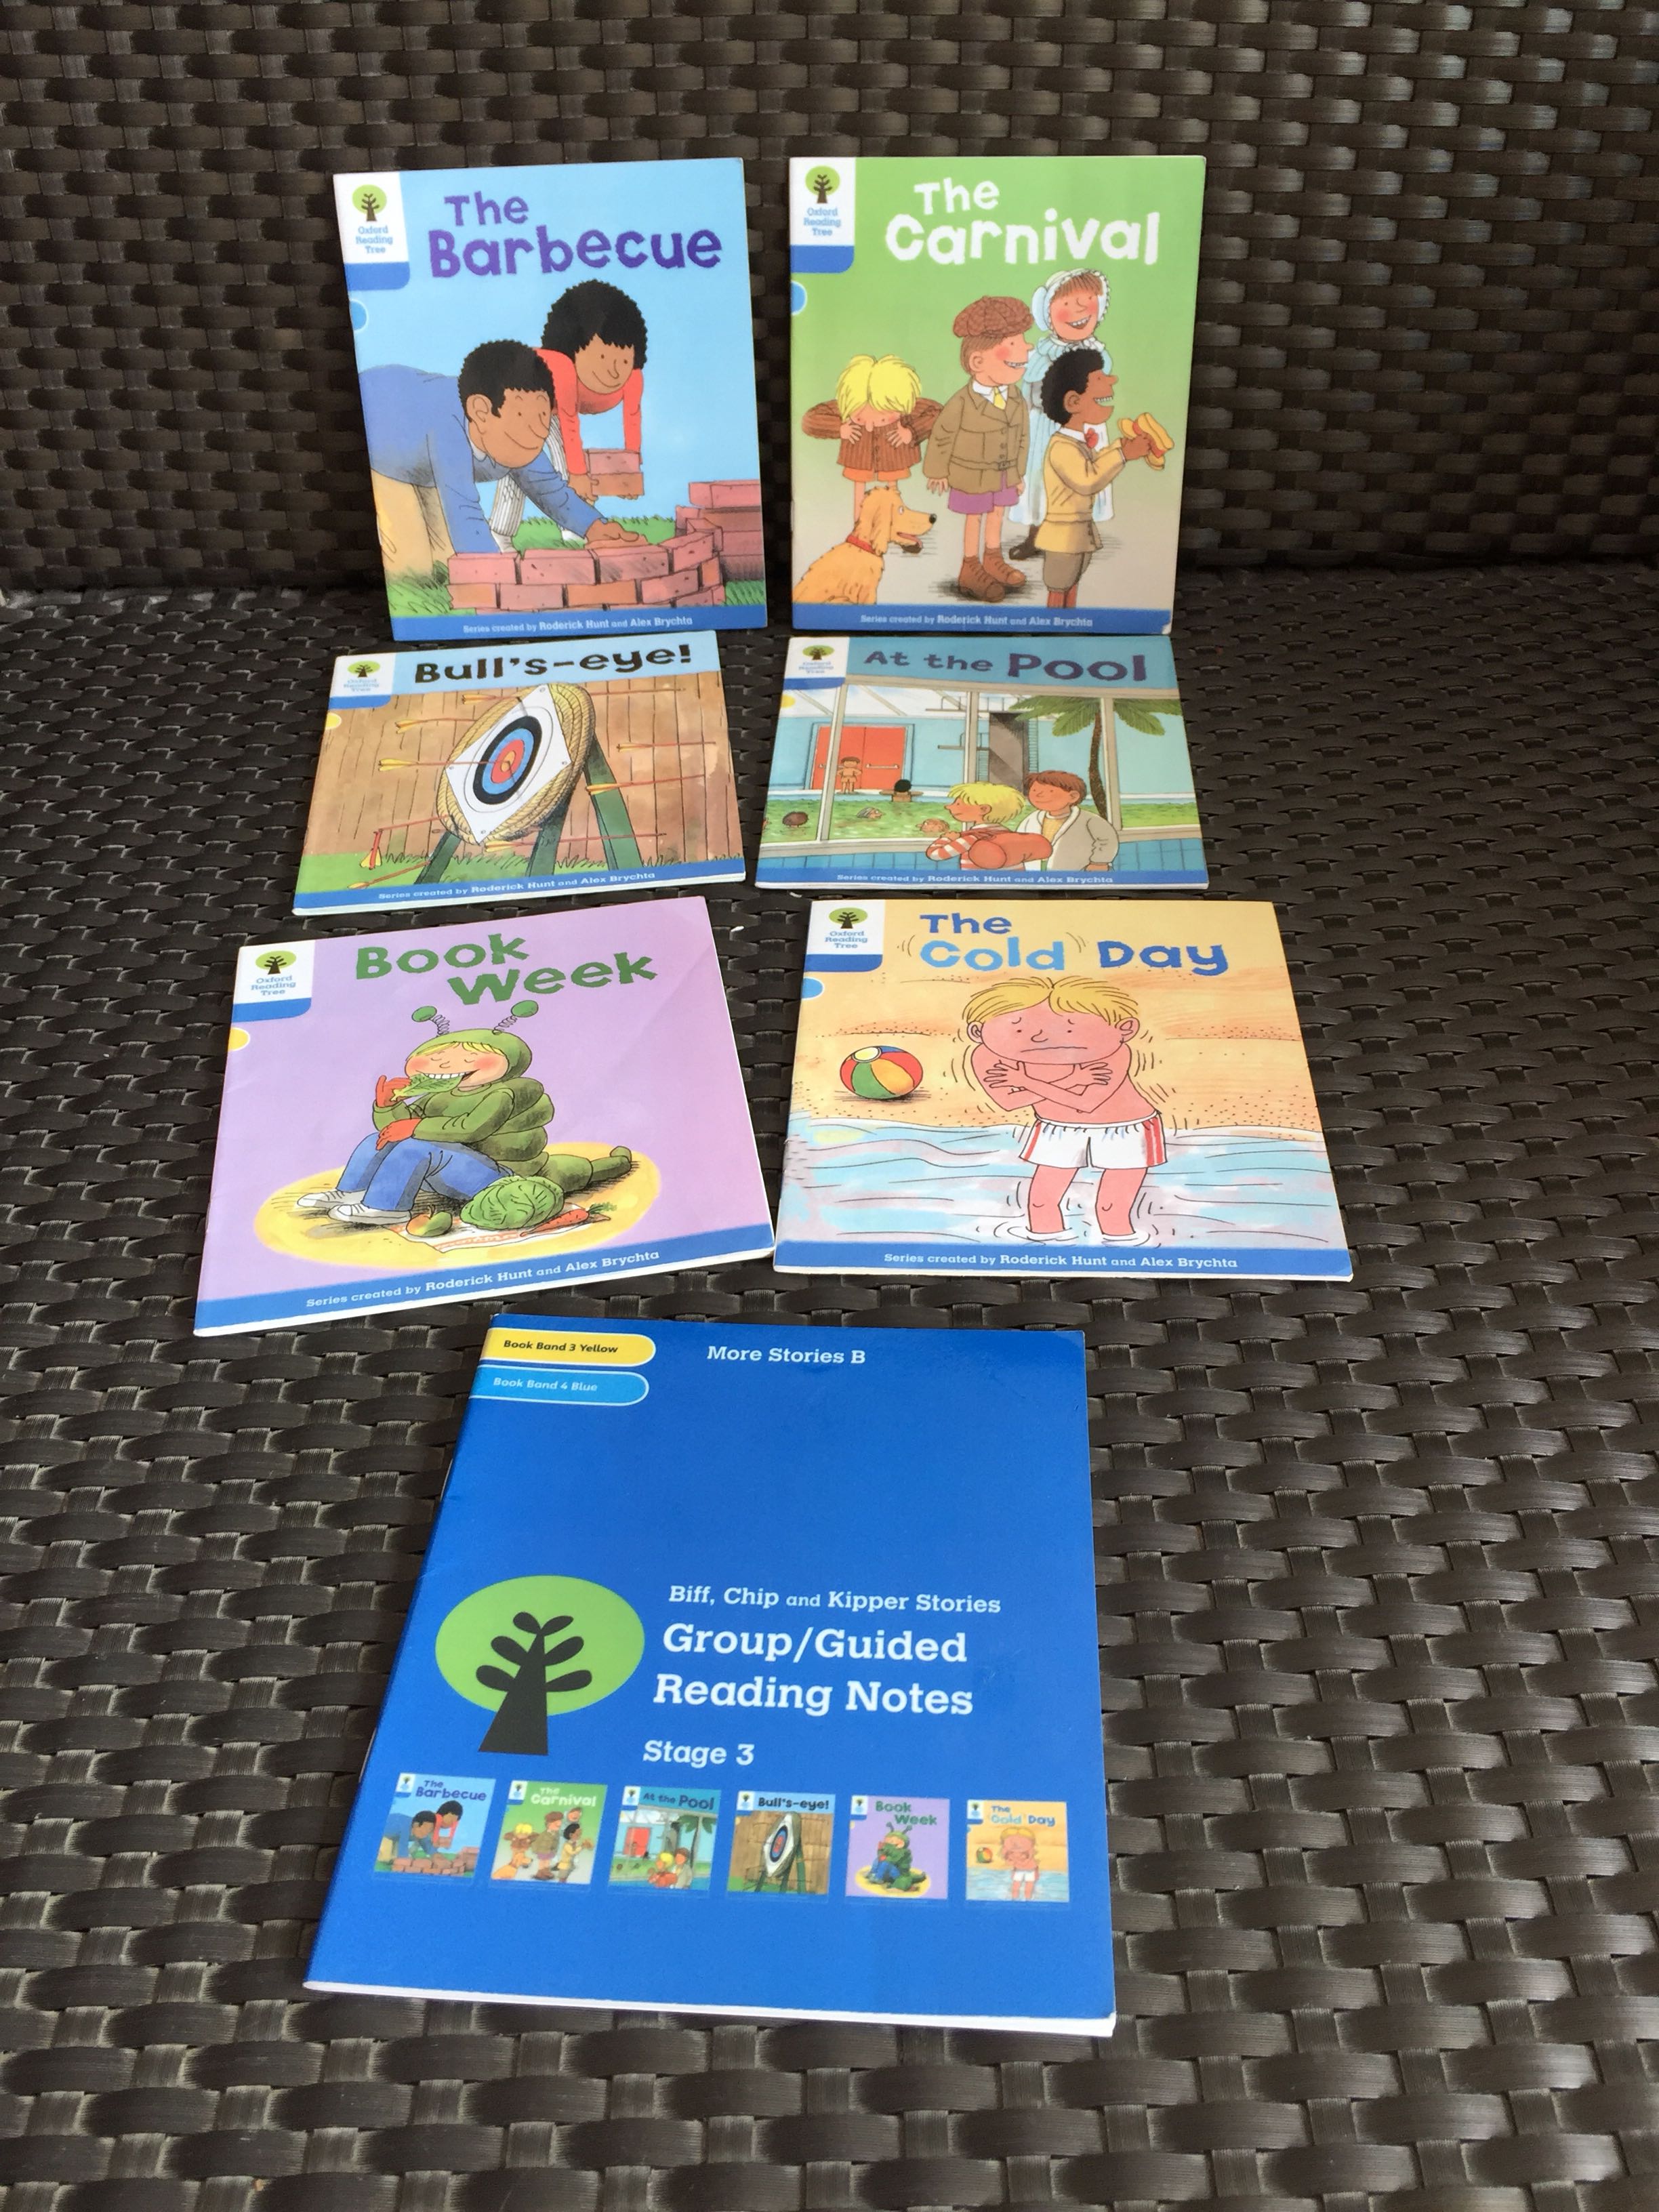 Oxford　Hobbies　Reading　of　B　Stories　Tree　Books　Children's　Stage　More　Books　Pack　Toys,　6,　Magazines,　on　Carousell